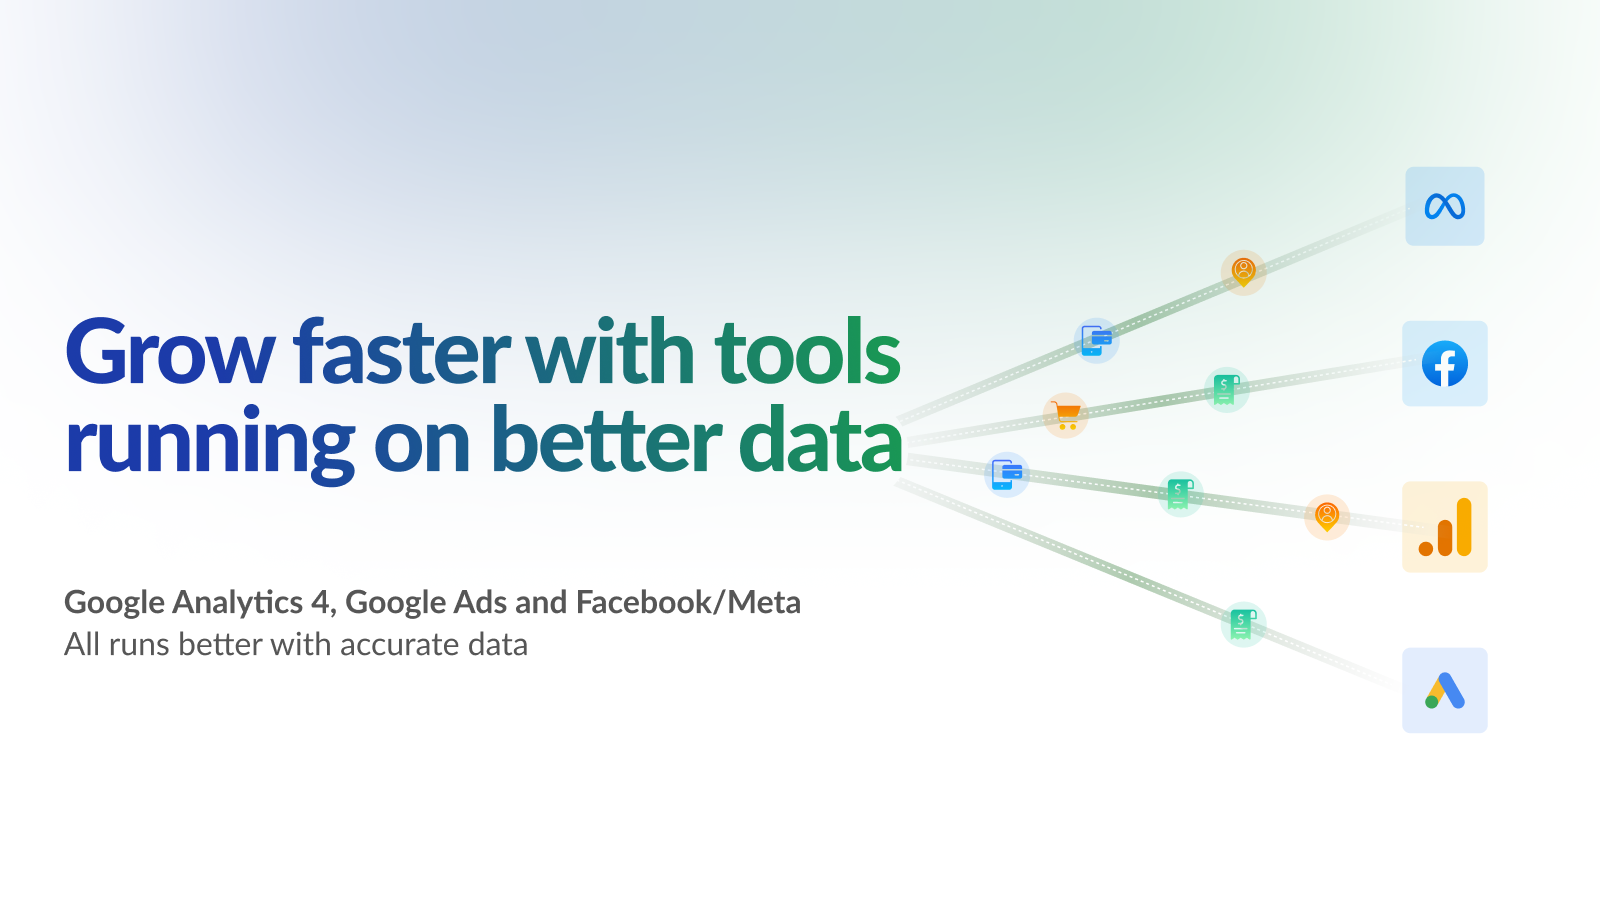 Grow faster with tools running on better data